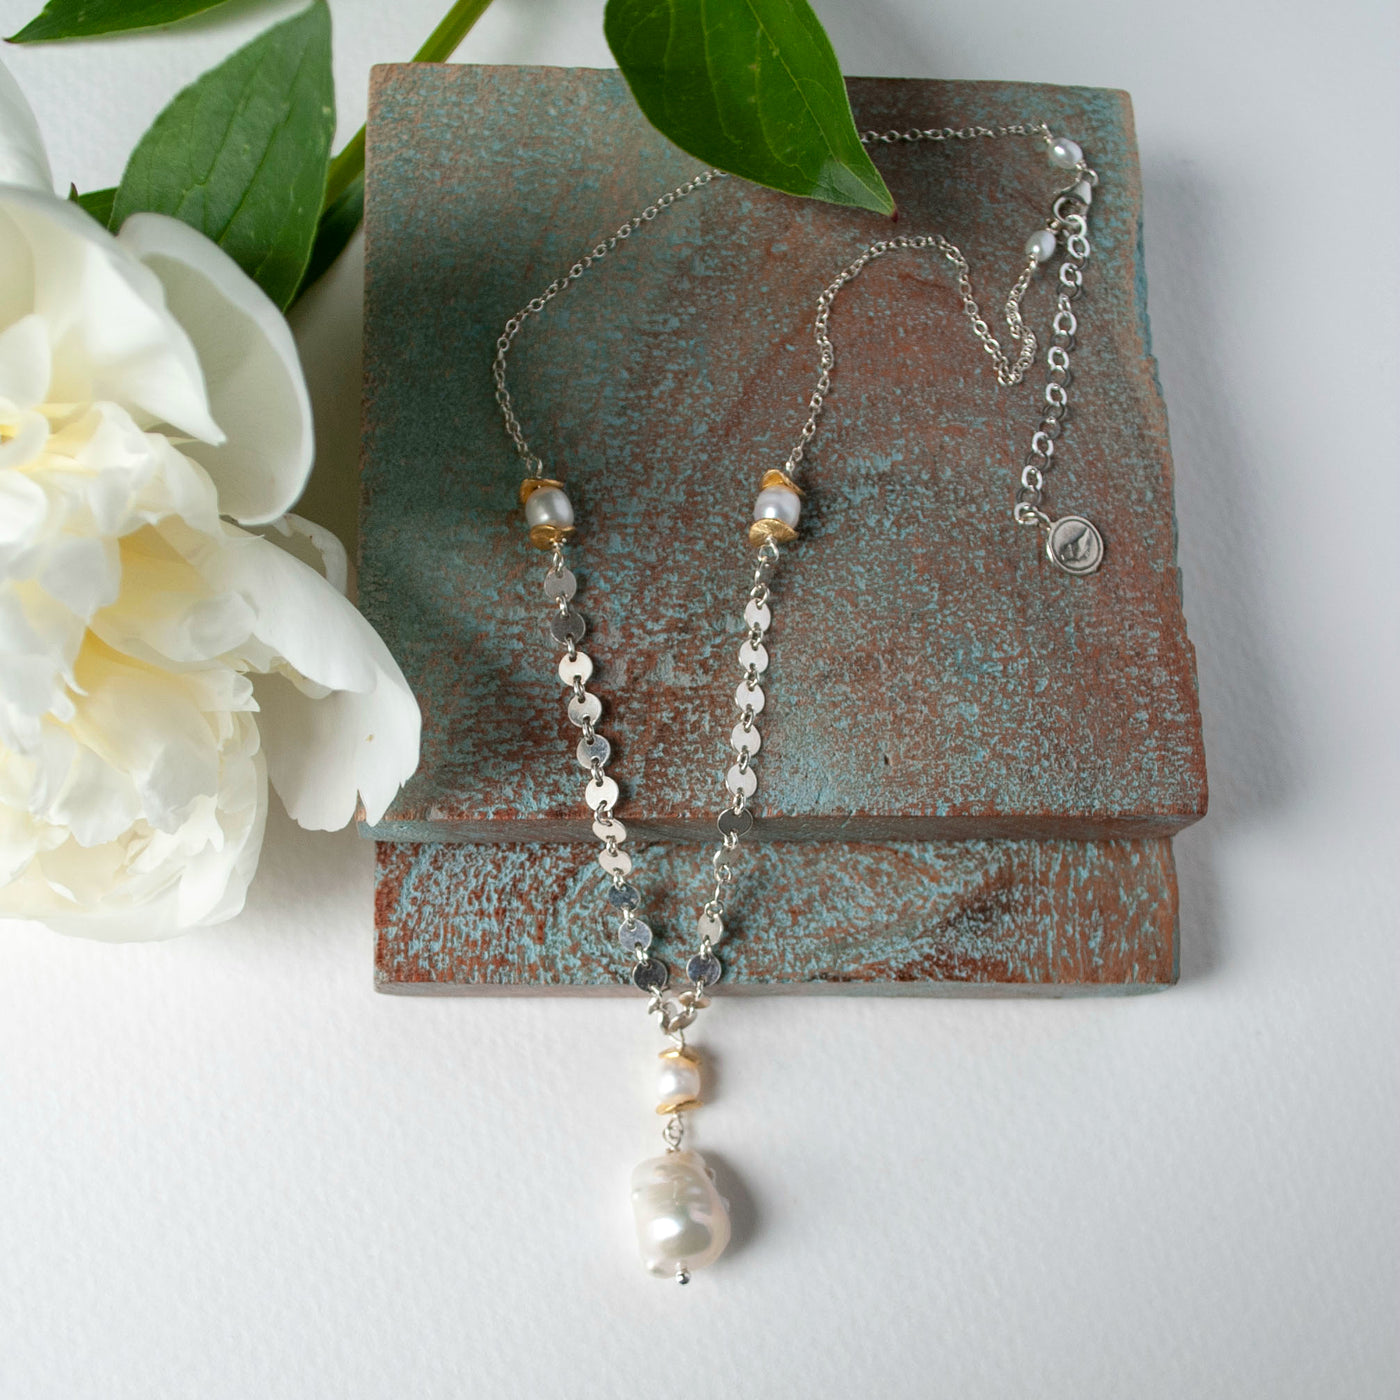 Baroque pearl necklace with sterling silver sequin chain, 22k gold plated accent beads. Shown in full with a 2" extender.